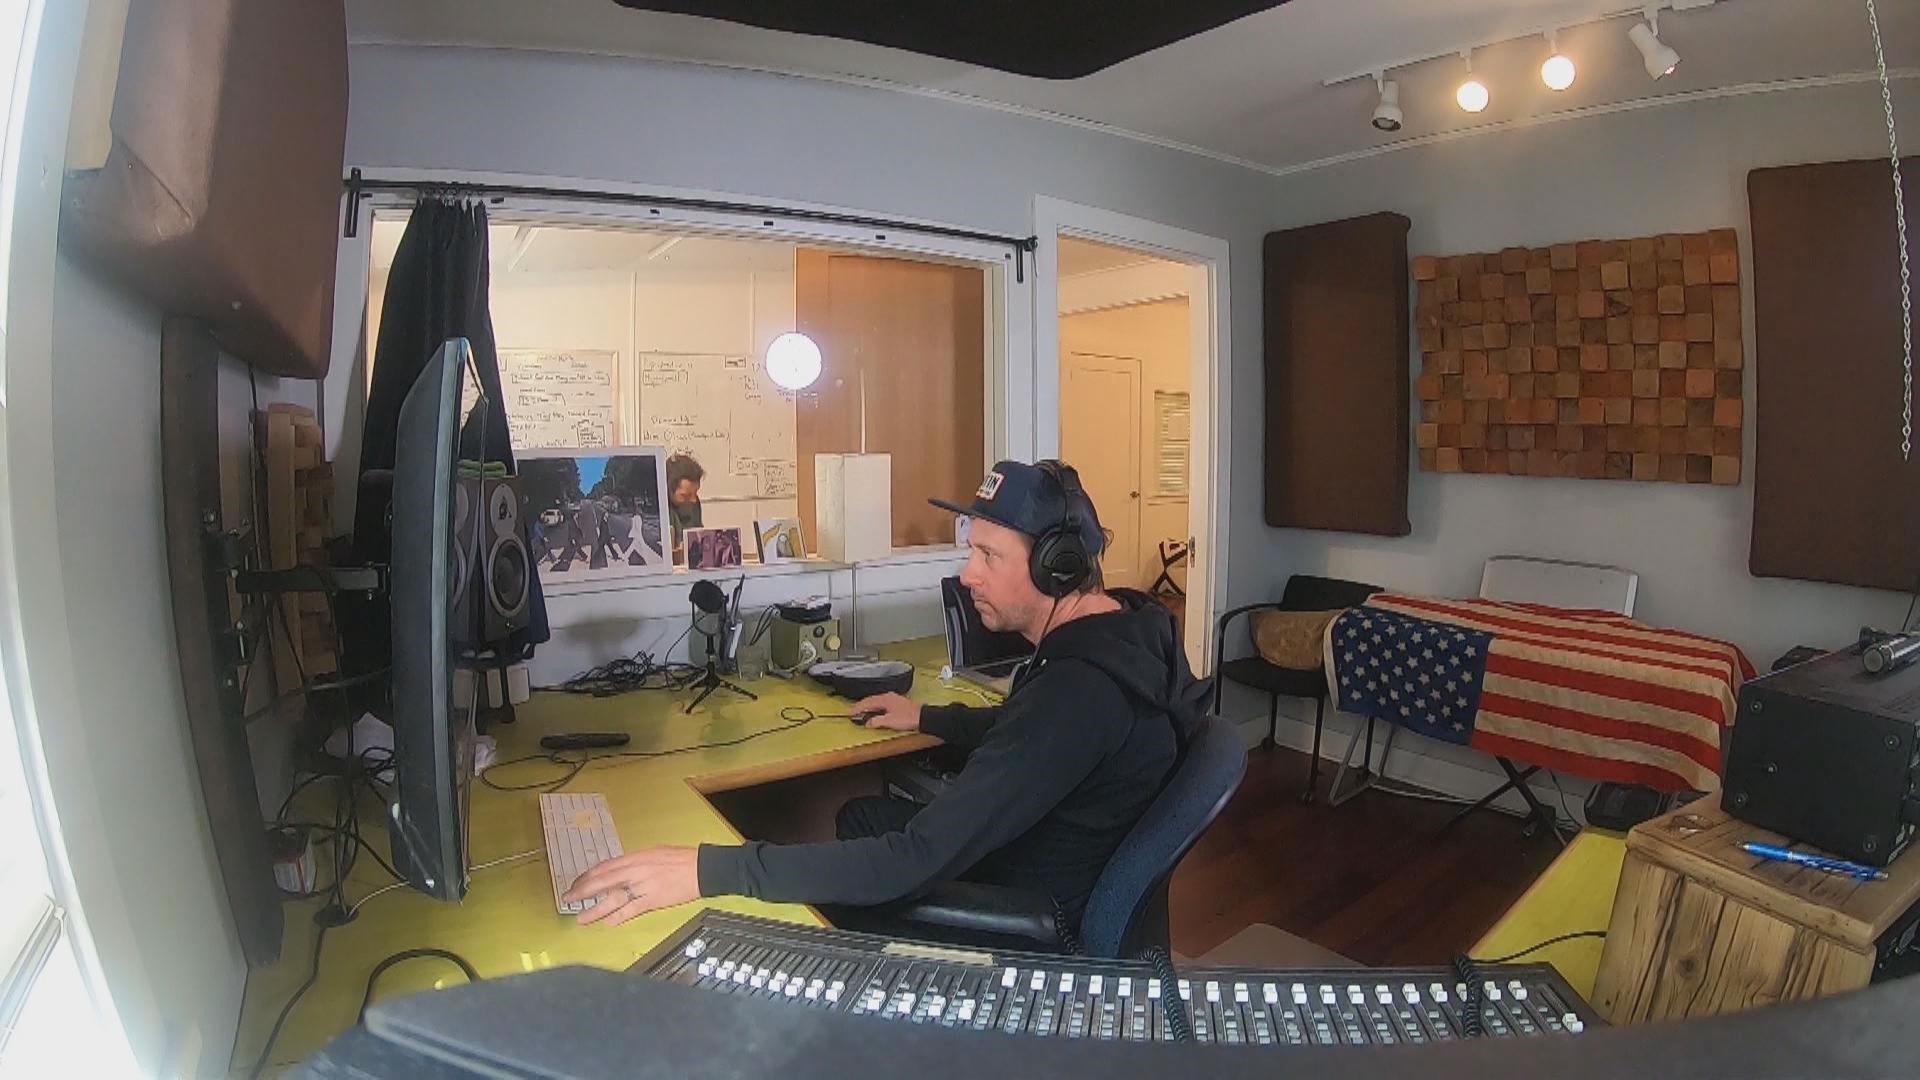 Learn all about the music industry from life on the road to audio engineering. #k5evening